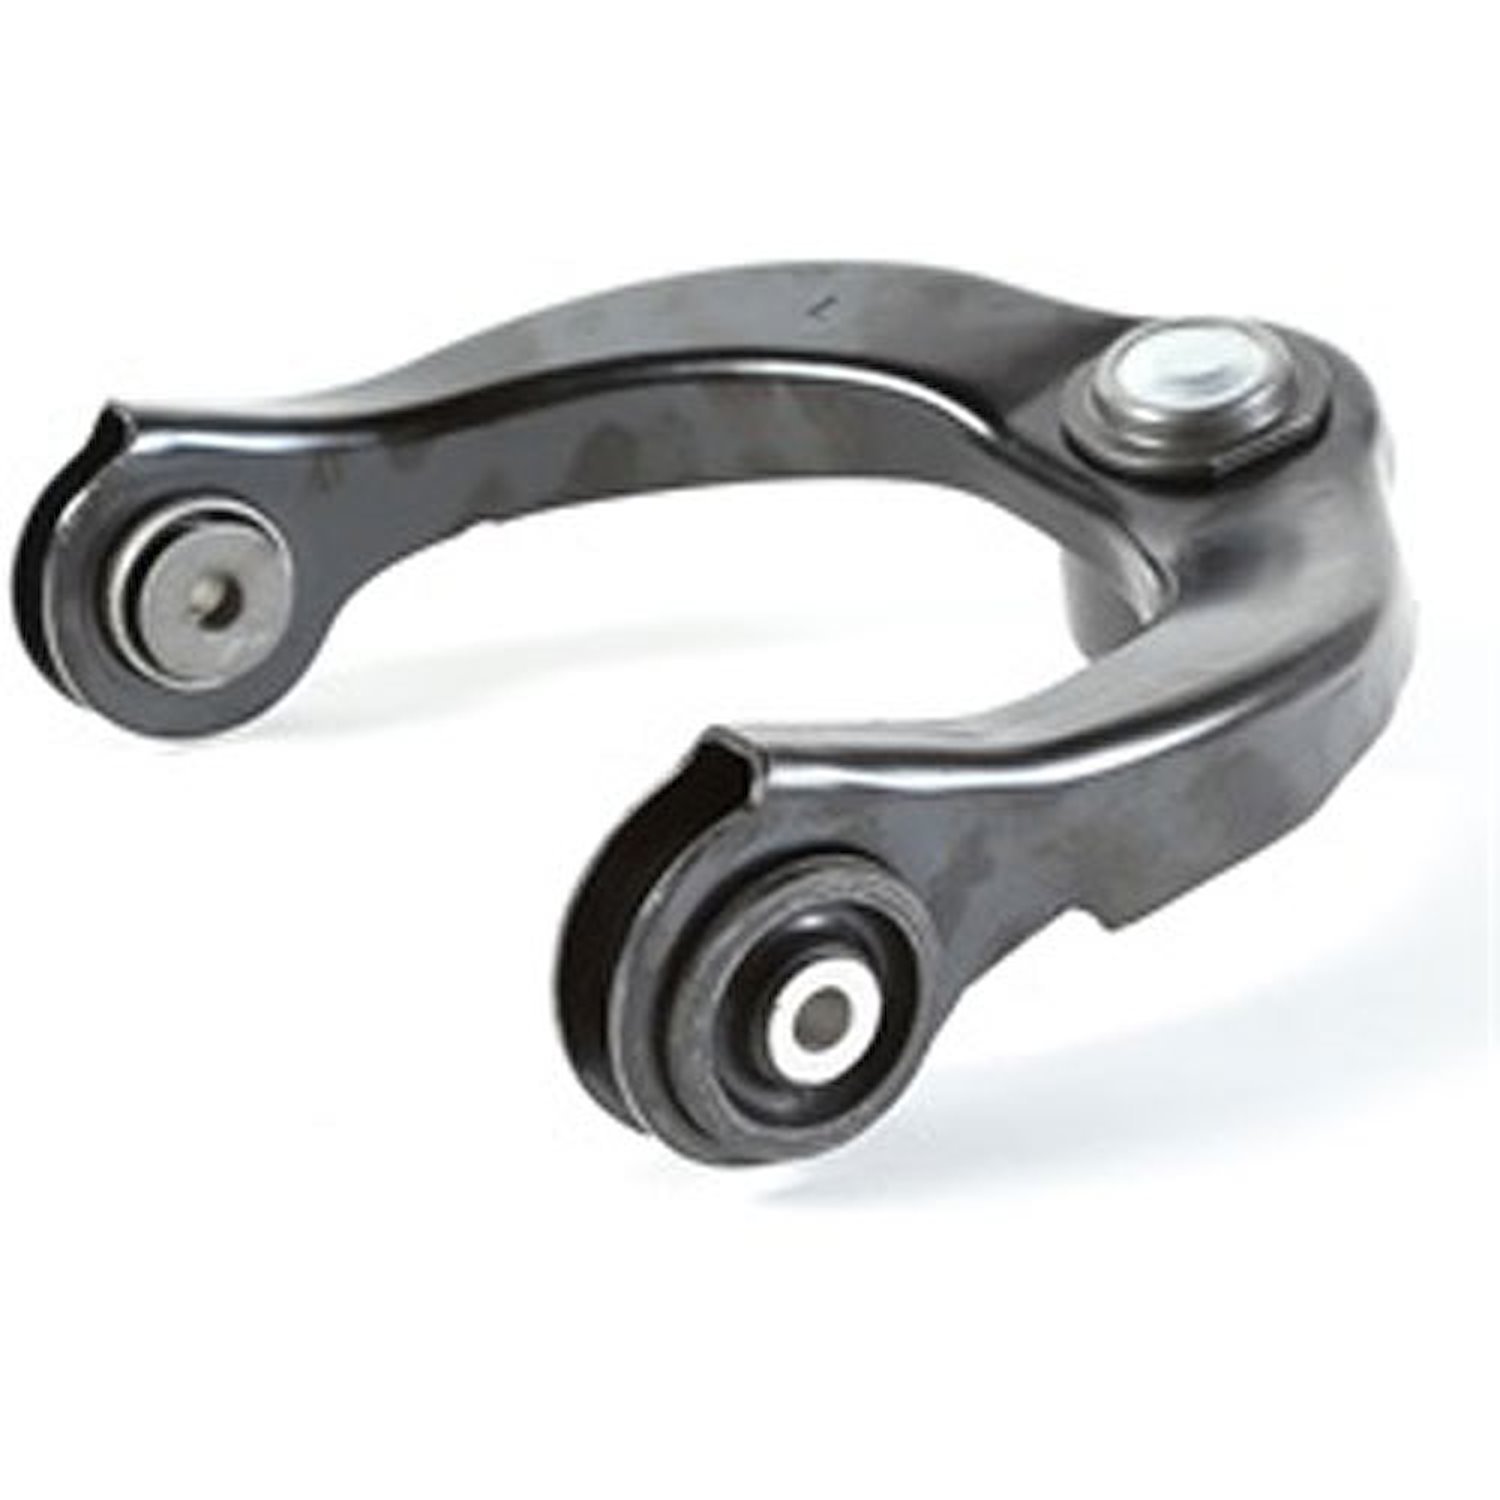 This left front upper control arm from Omix-ADA fits 11-16 Jeep Grand Cherokees. Includes ball joint.